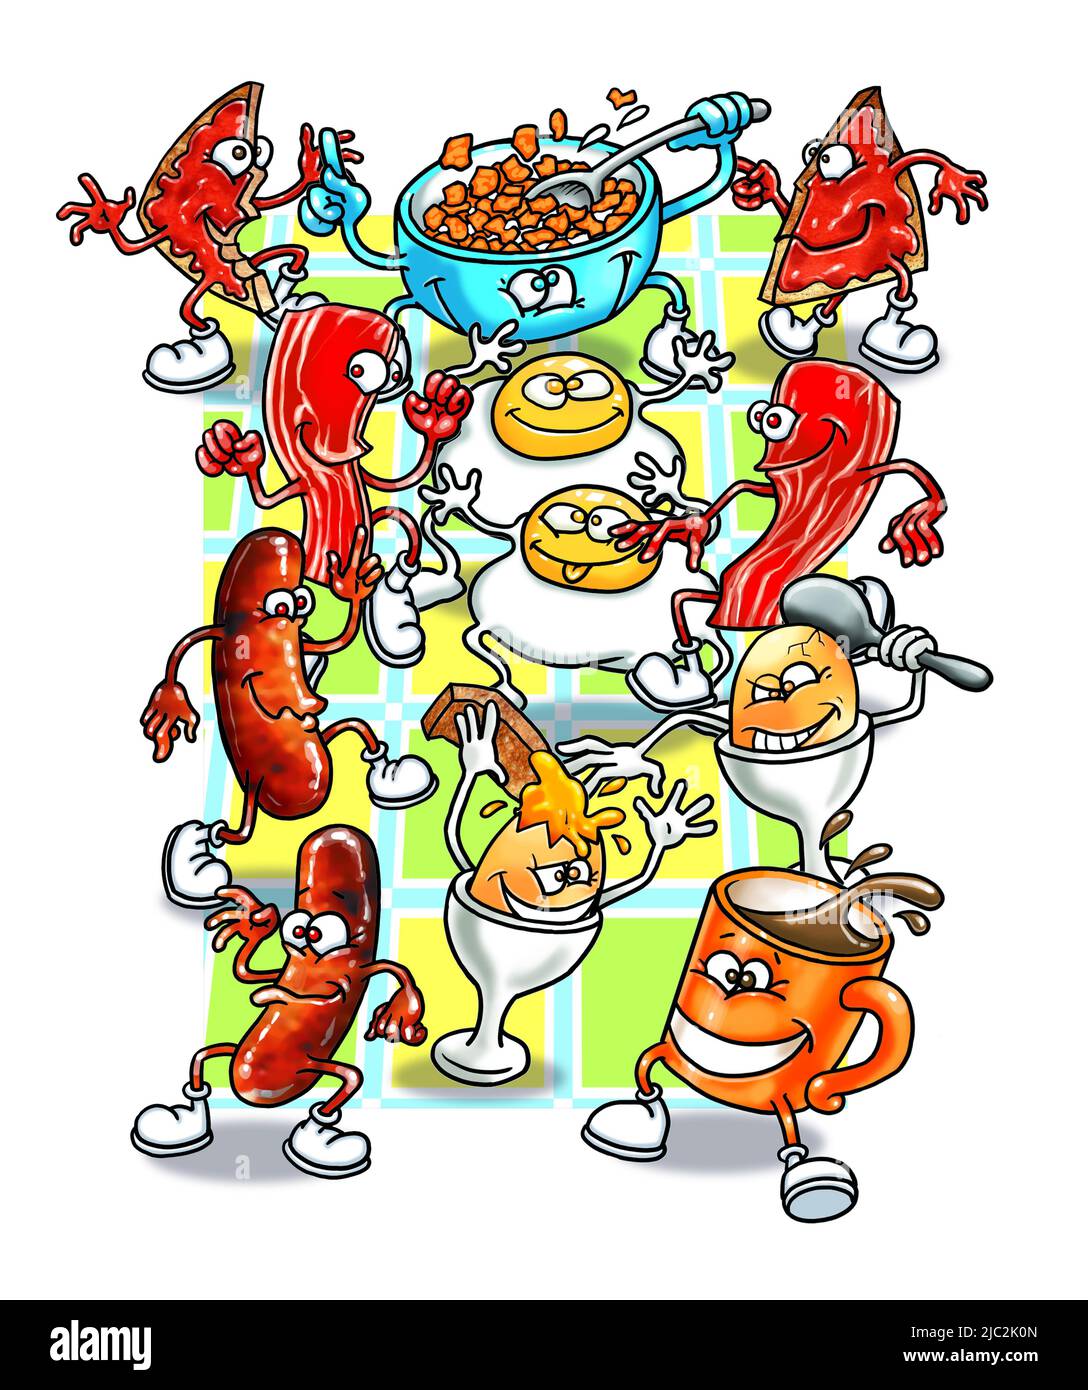 Cartoon art, happy dancing food items, pizza, bacon, sausages, boiled eggs, fried eggs,  art work to suit menu, business card, food-themed web site. Stock Photo